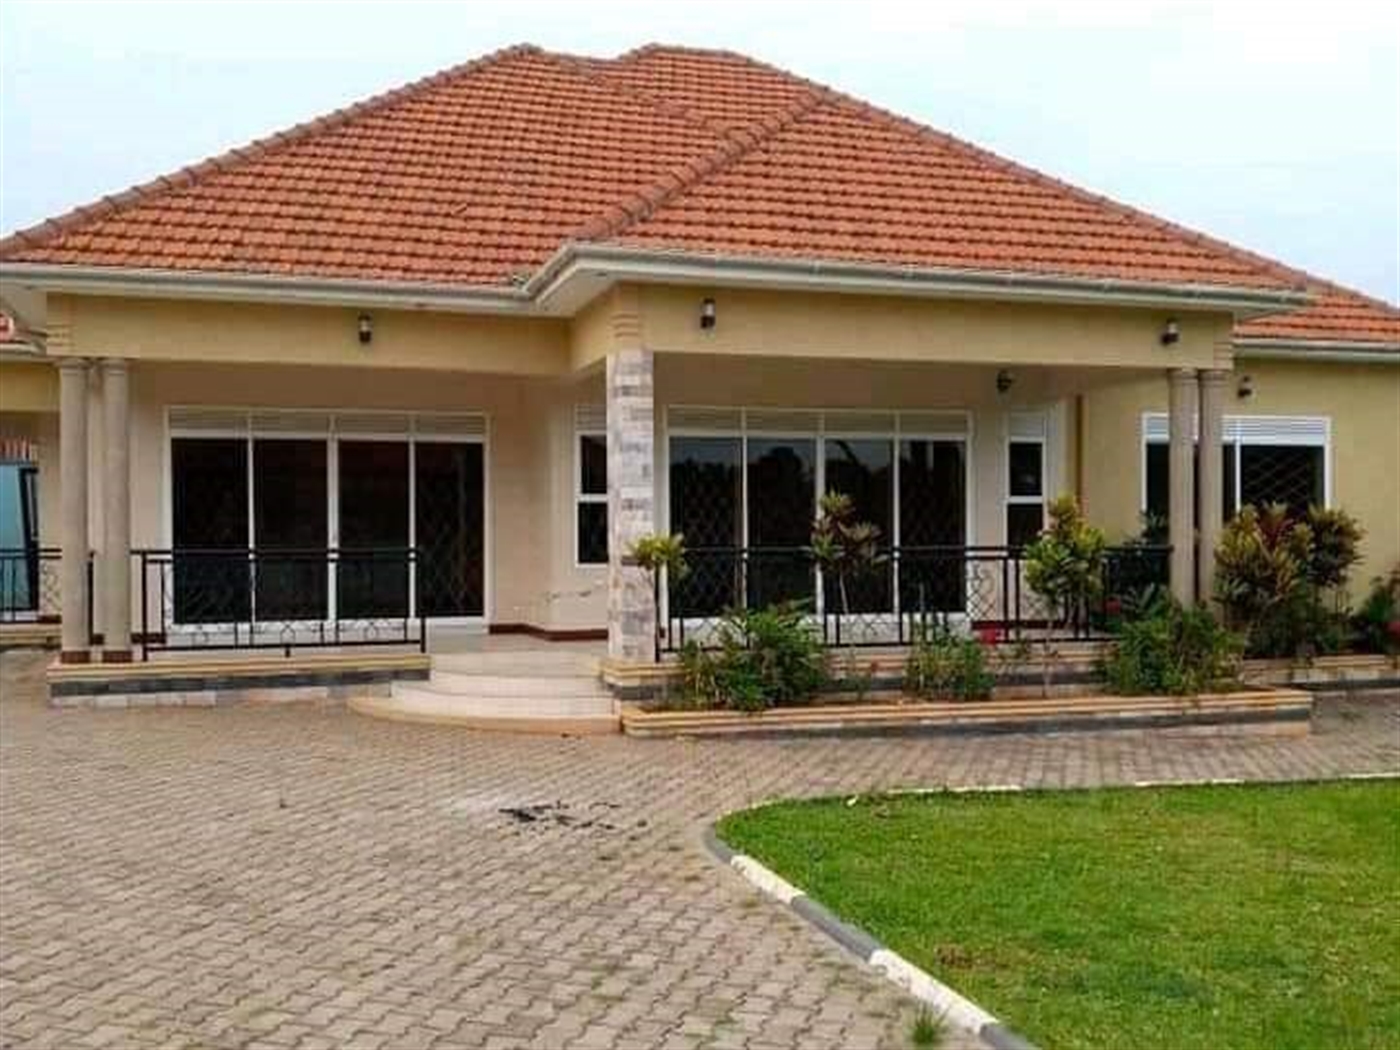 Bungalow for rent in Kitende Kampala